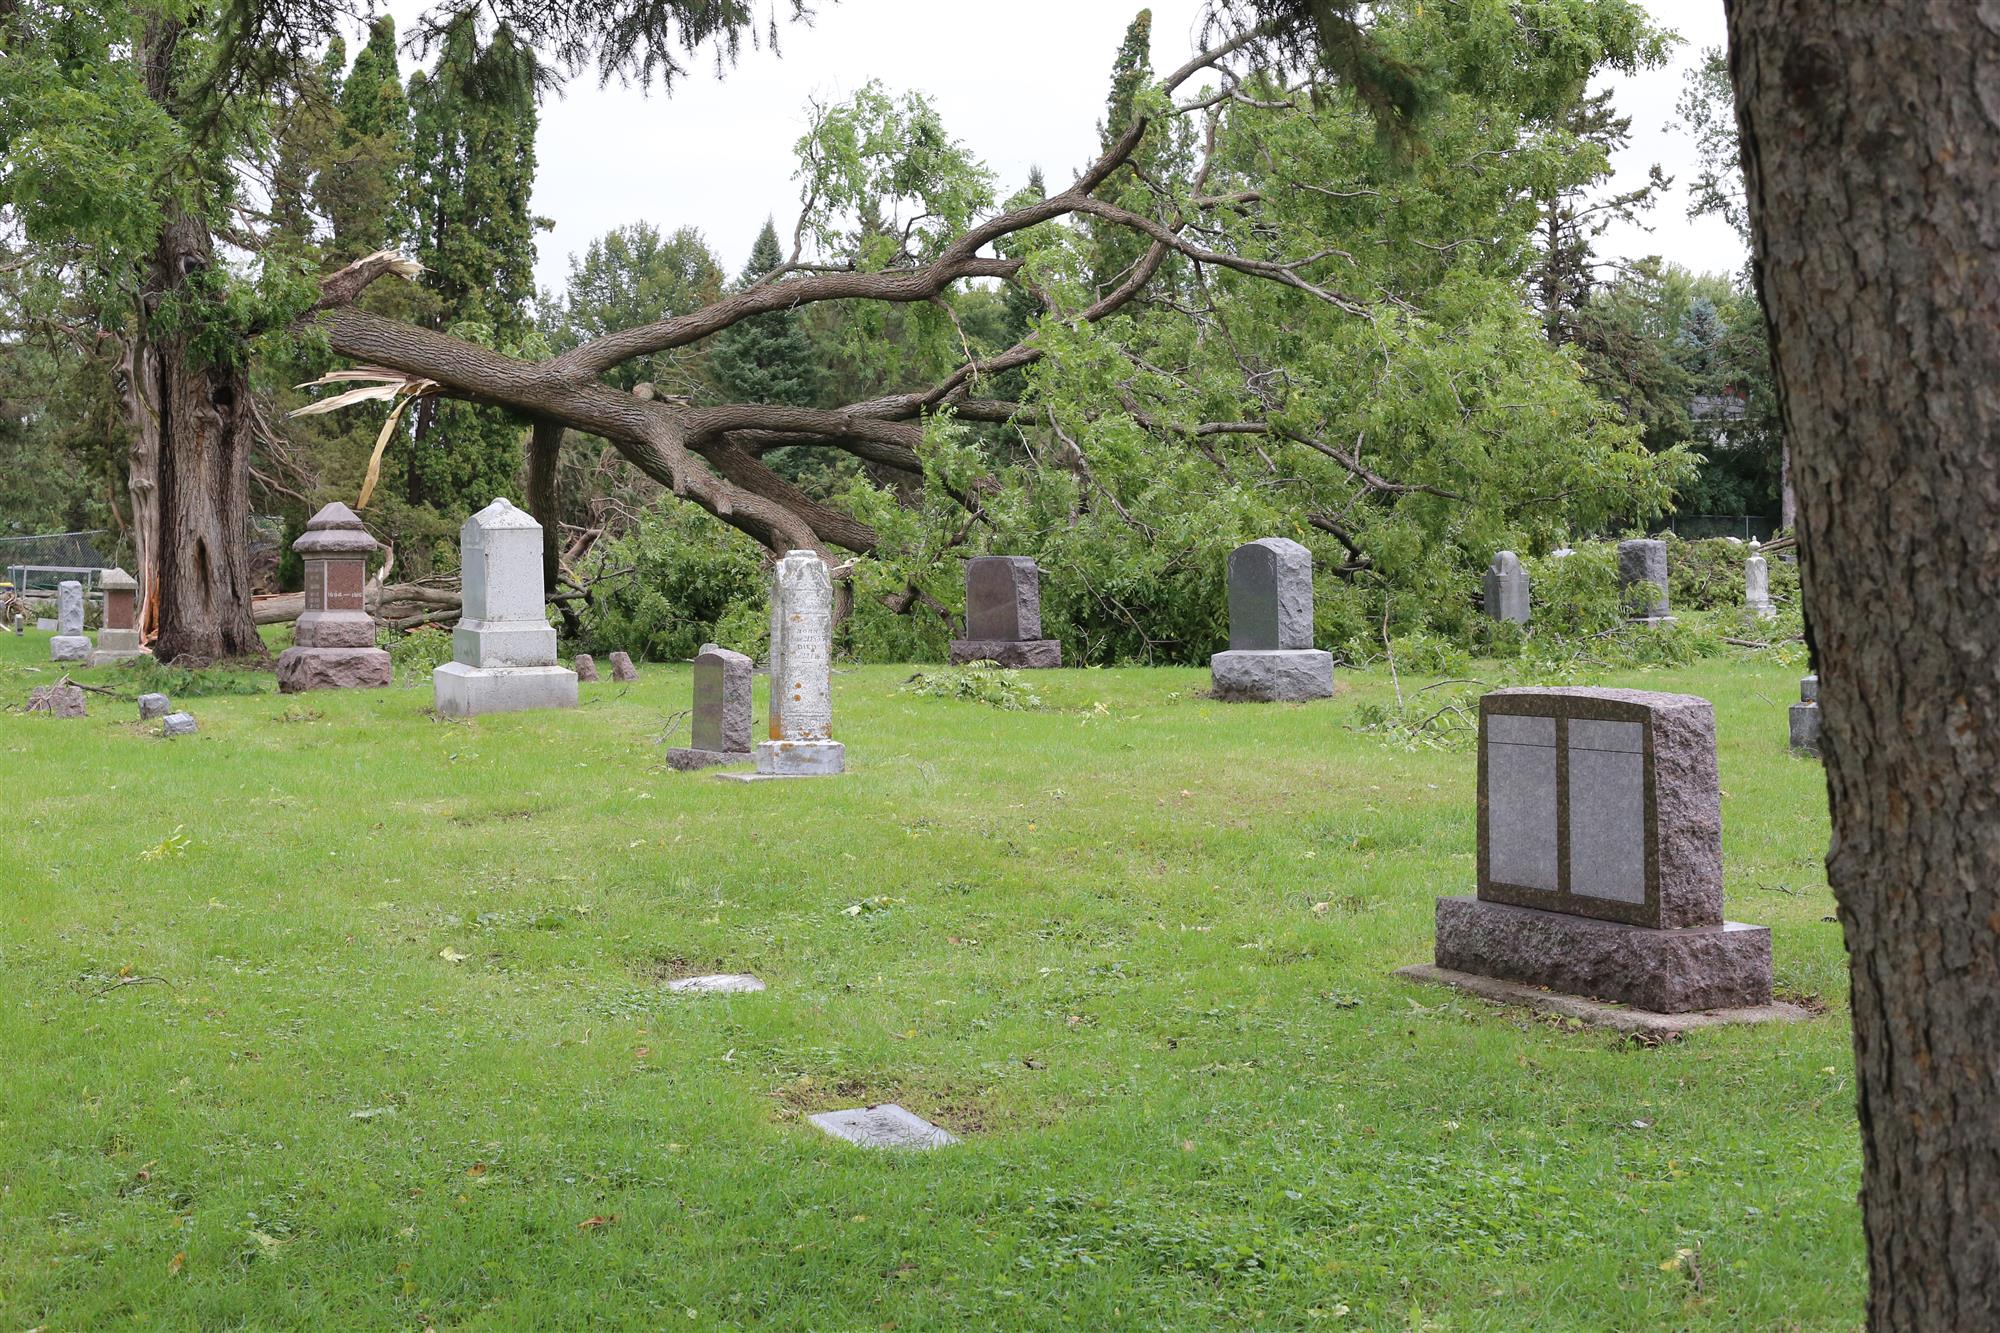 Cemetery Tree Removal Service for Southeastern Wisconsin